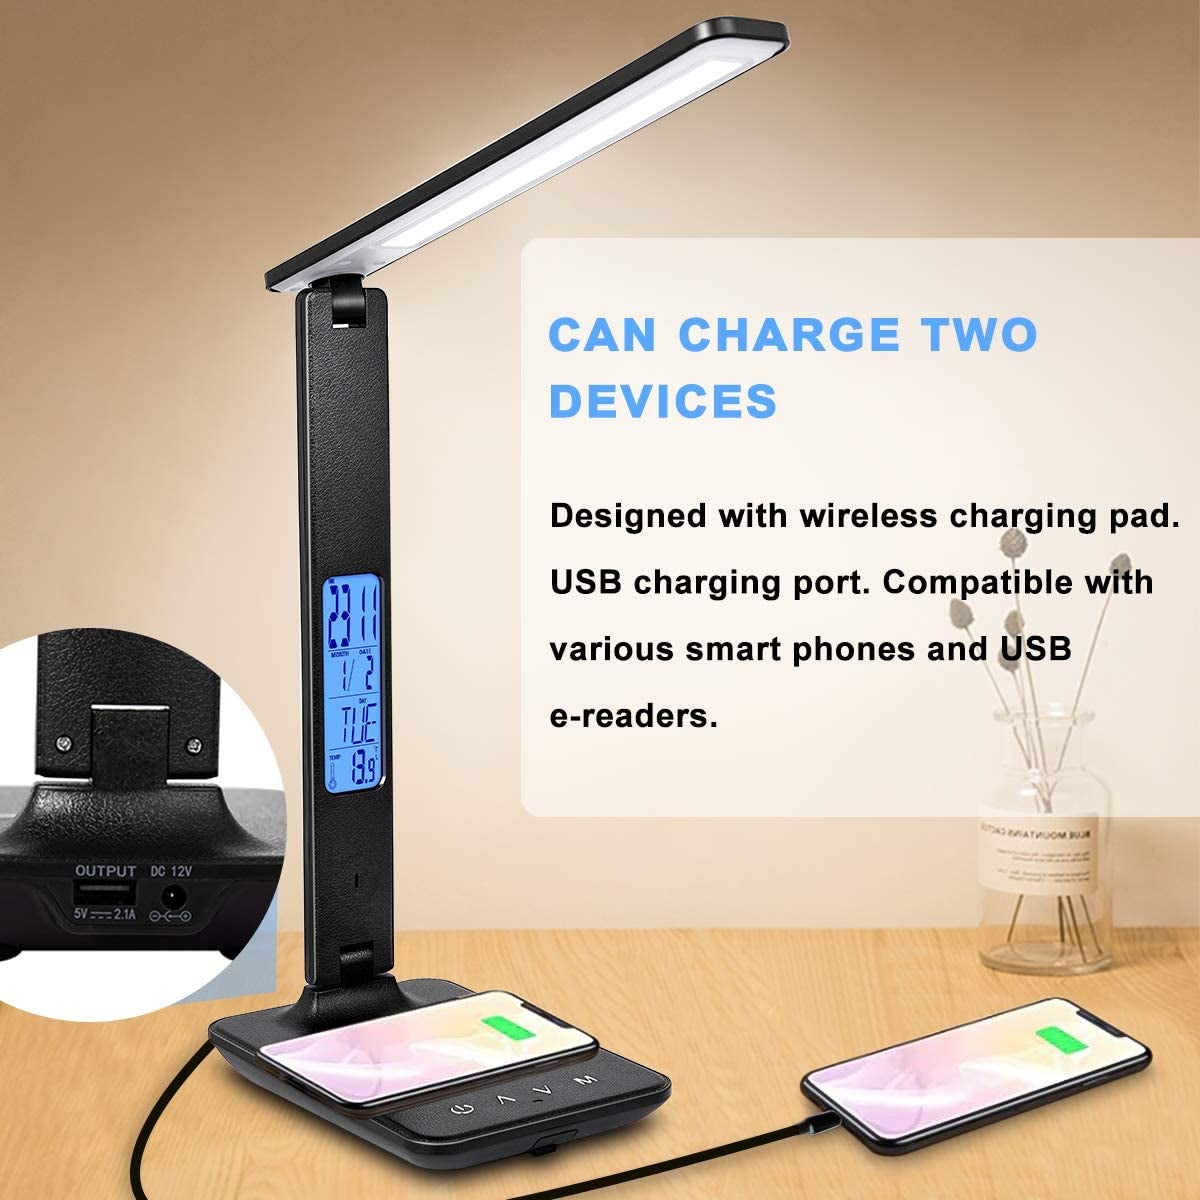 "Versatile LED Desk Lamp with Wireless Charging, Dimmable Light, USB Port, Clock, Calendar, and Thermometer - Ideal for Home and Office Use!"